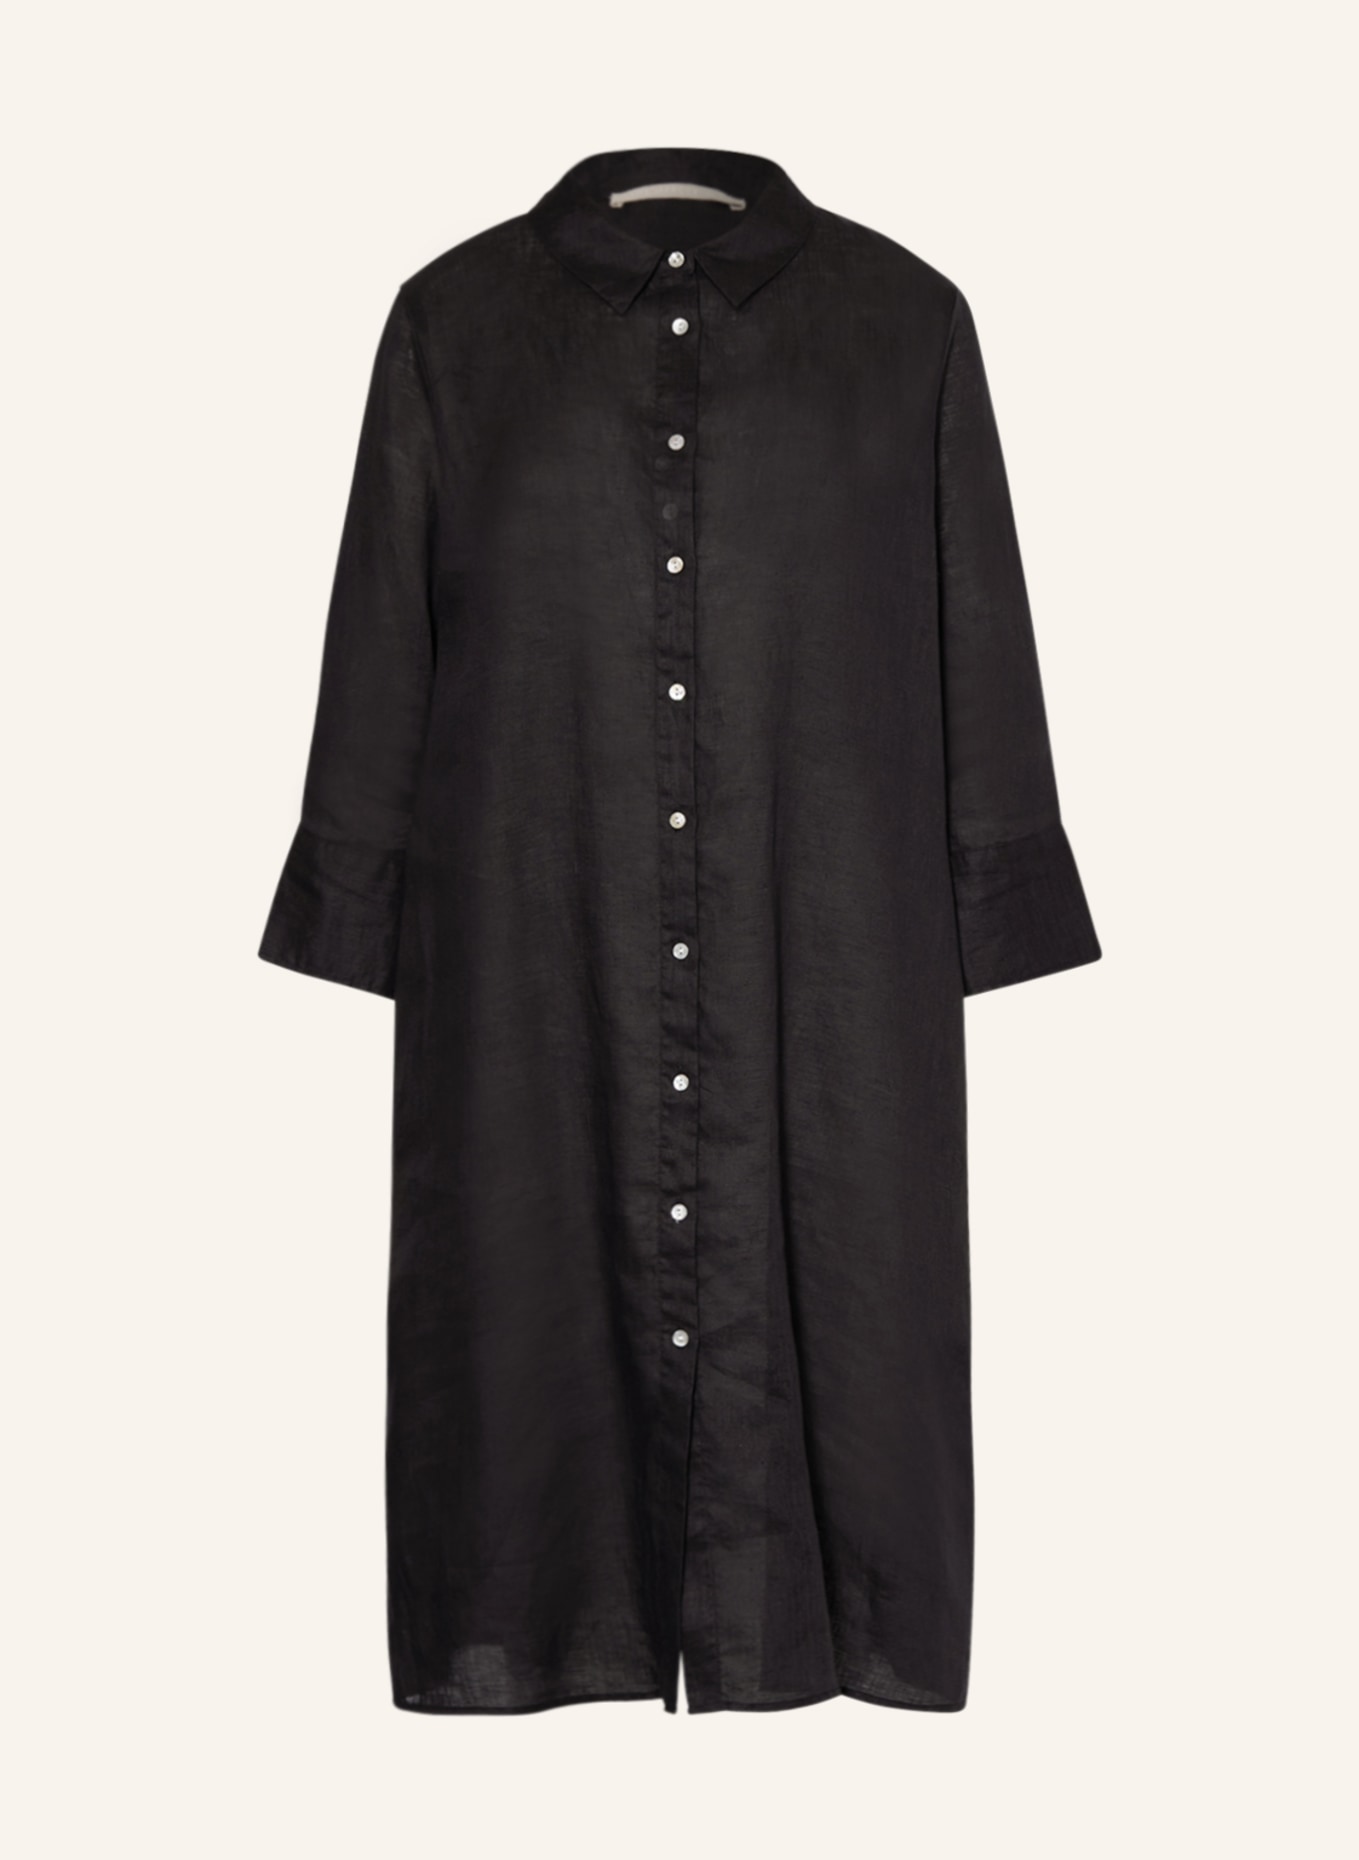 (THE MERCER) N.Y. Shirt dress made of linen with 3/4 sleeves, Color: BLACK (Image 1)